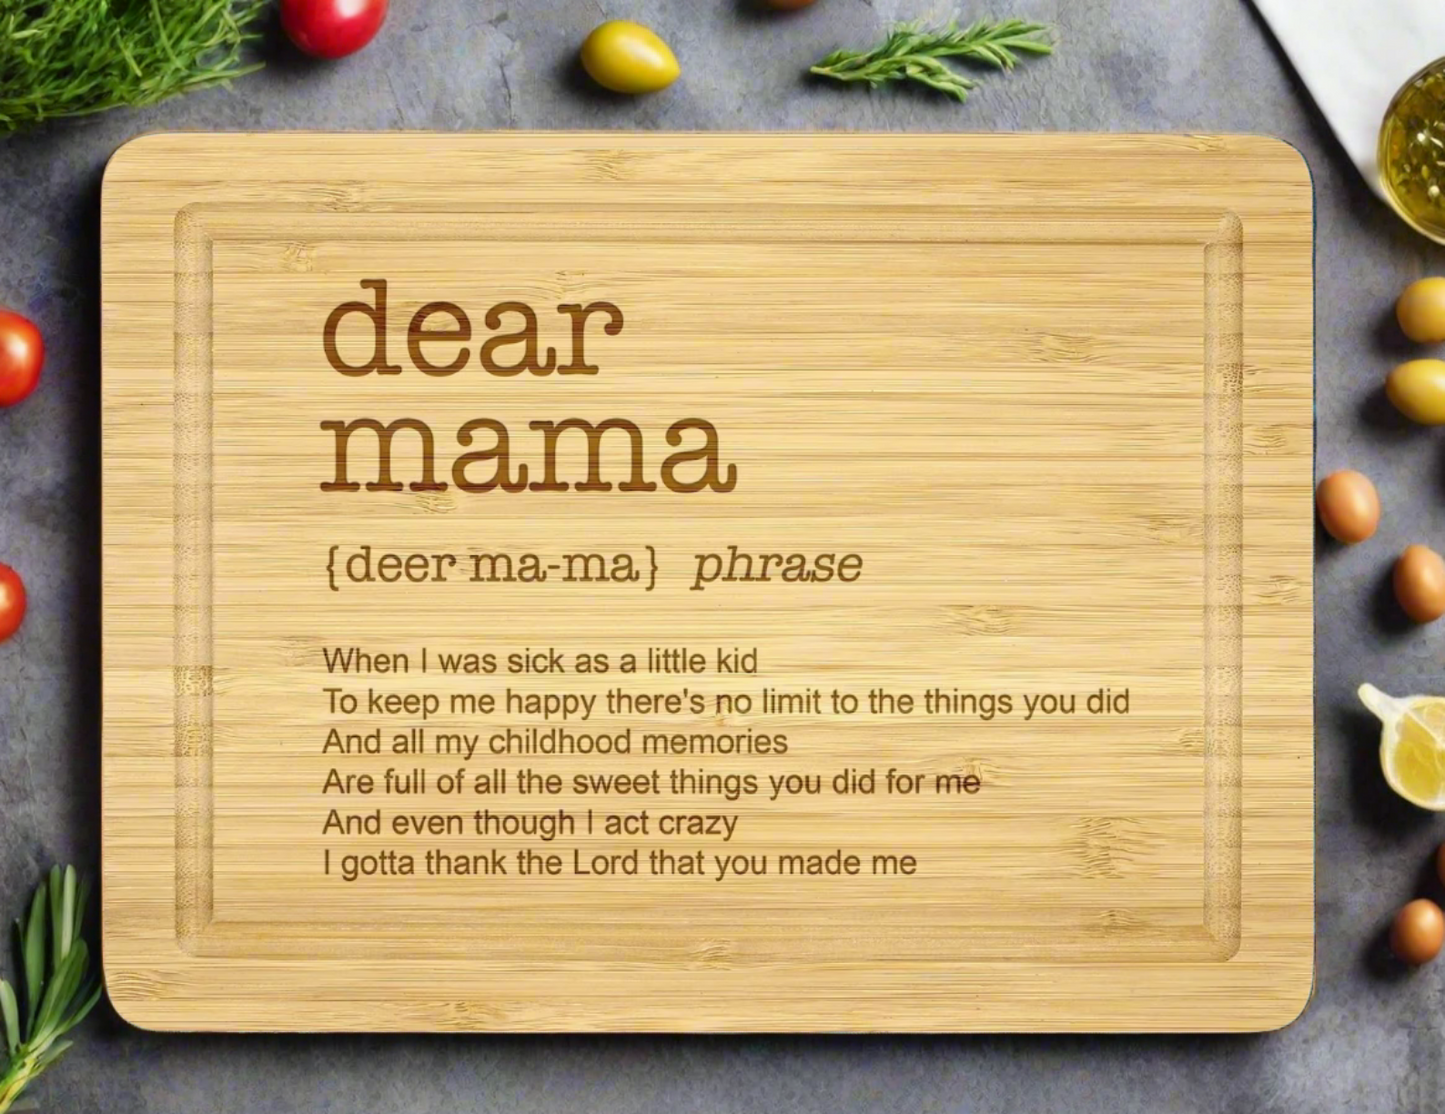 A Culinary Masterpiece: A Personalized Cutting Board for the Mother You Cherish